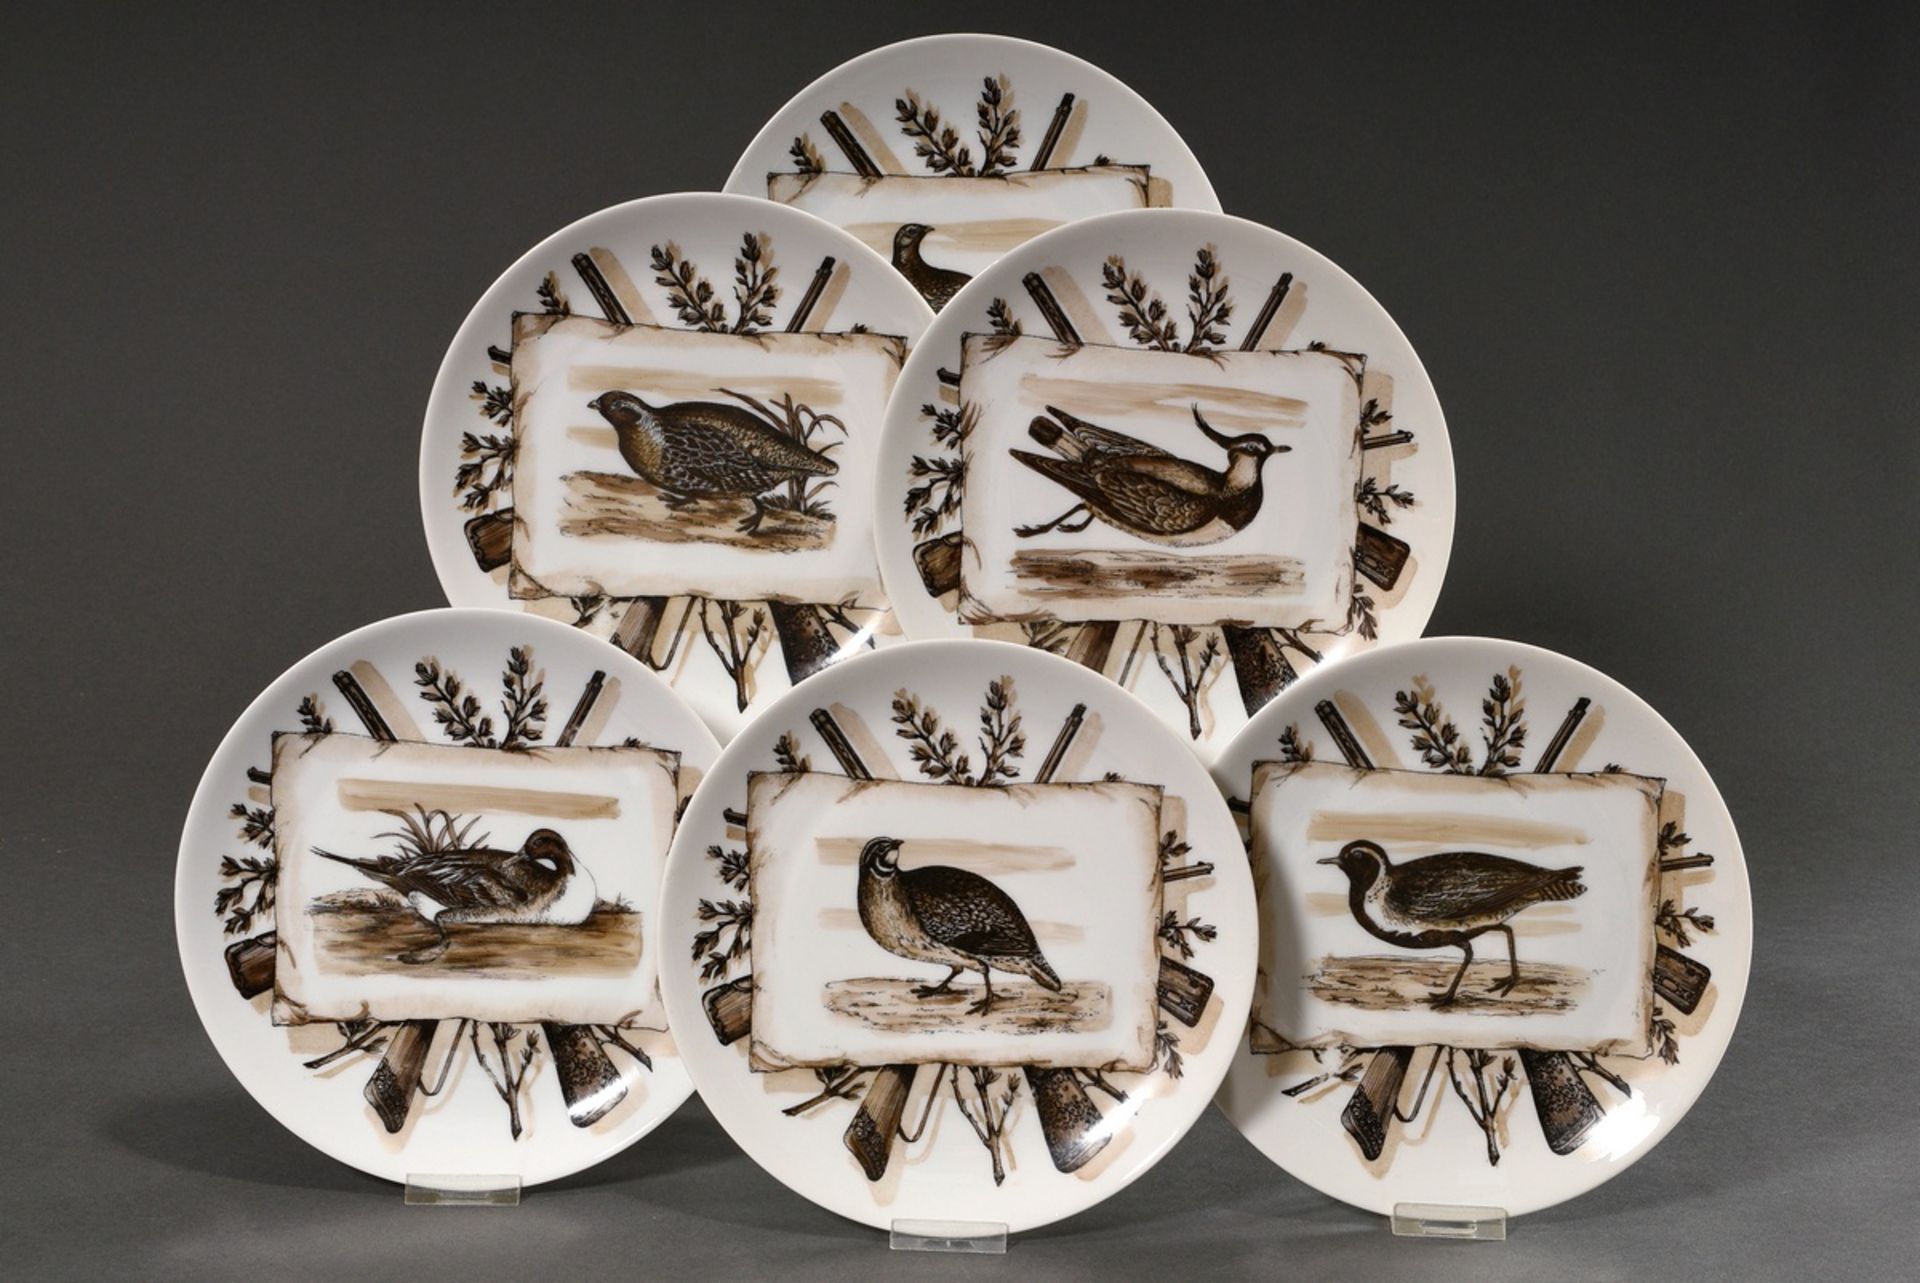 6 Fornasetti, Piero (1913-1988) plate with various sepia prints "bird motifs with hunting weapons"  - Image 3 of 10